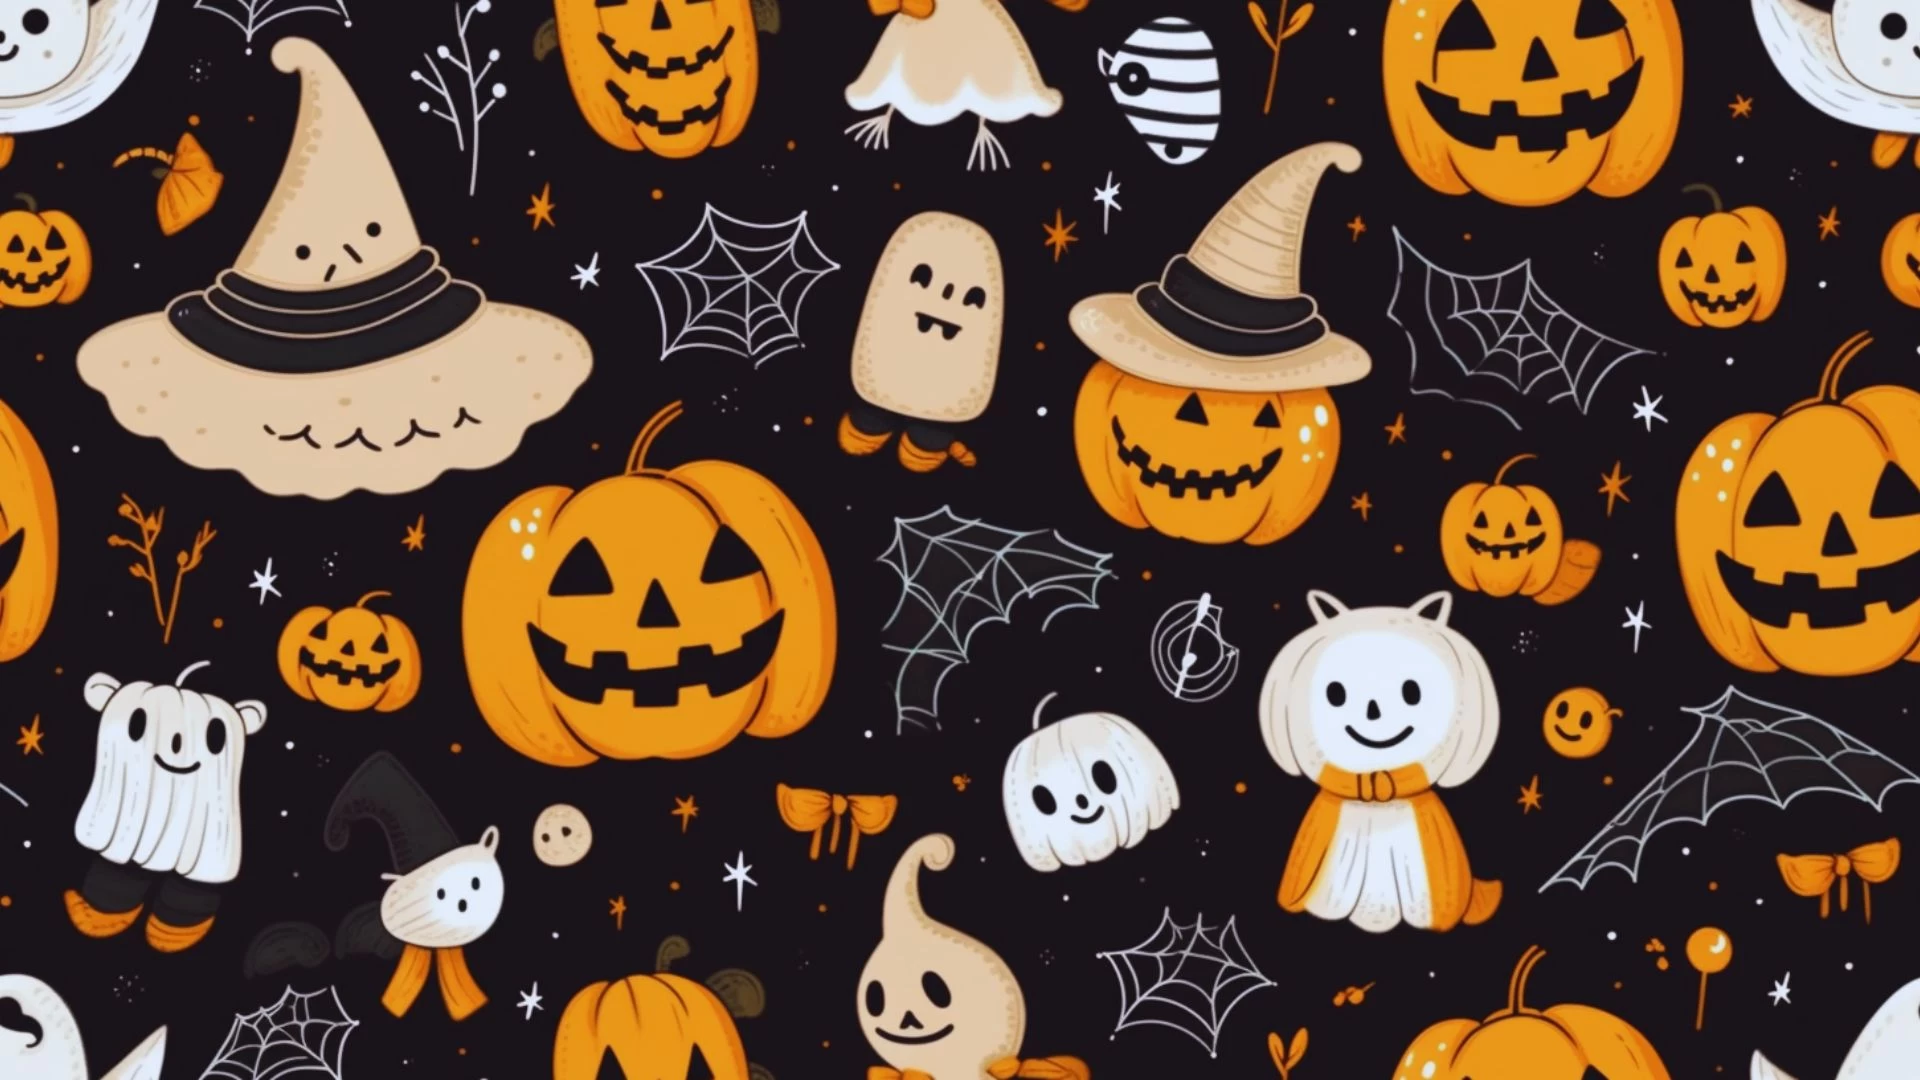 99% Will Fail To Find The Hidden Lollipop In This Halloween Picture In Just 8 Seconds